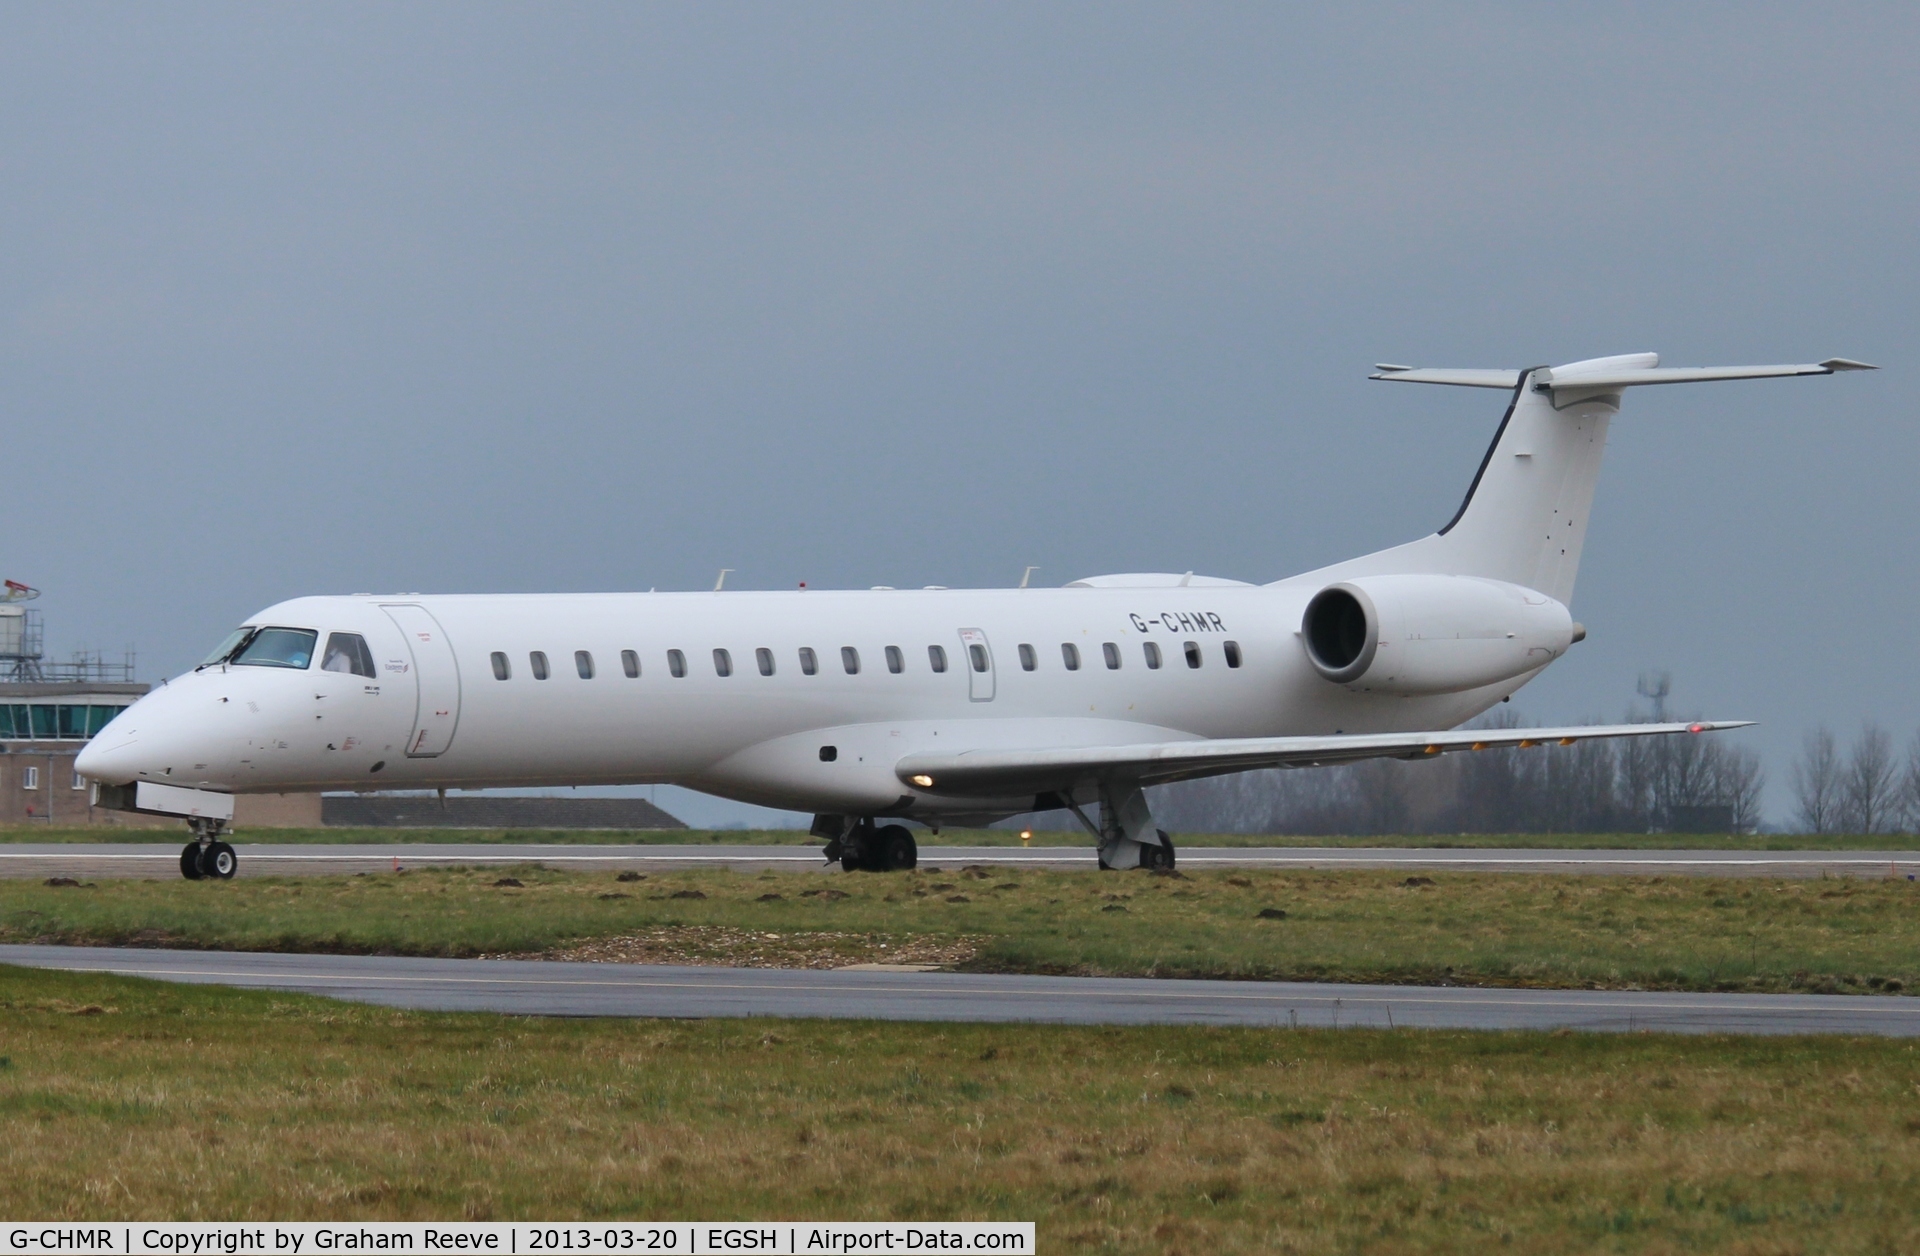 G-CHMR, 2001 Embraer EMB-145MP (ERJ-145MP) C/N 145405, About to depart on runway 09.